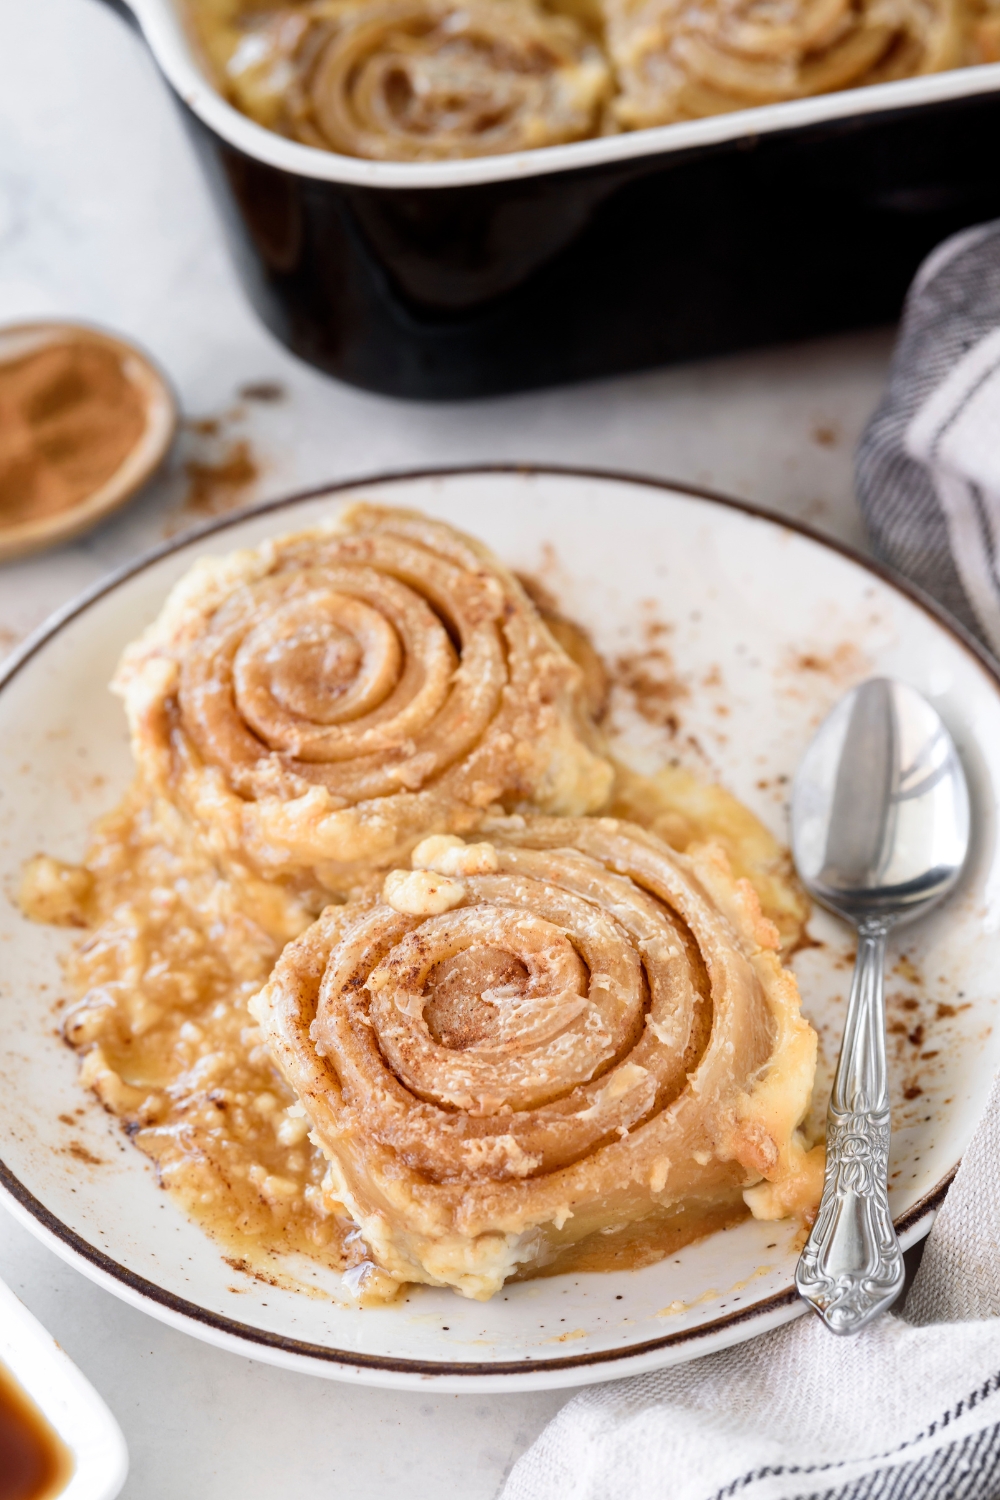 Two cinnamon rolls covered in a brown sugar butter mixture and dusted with cinnamon.